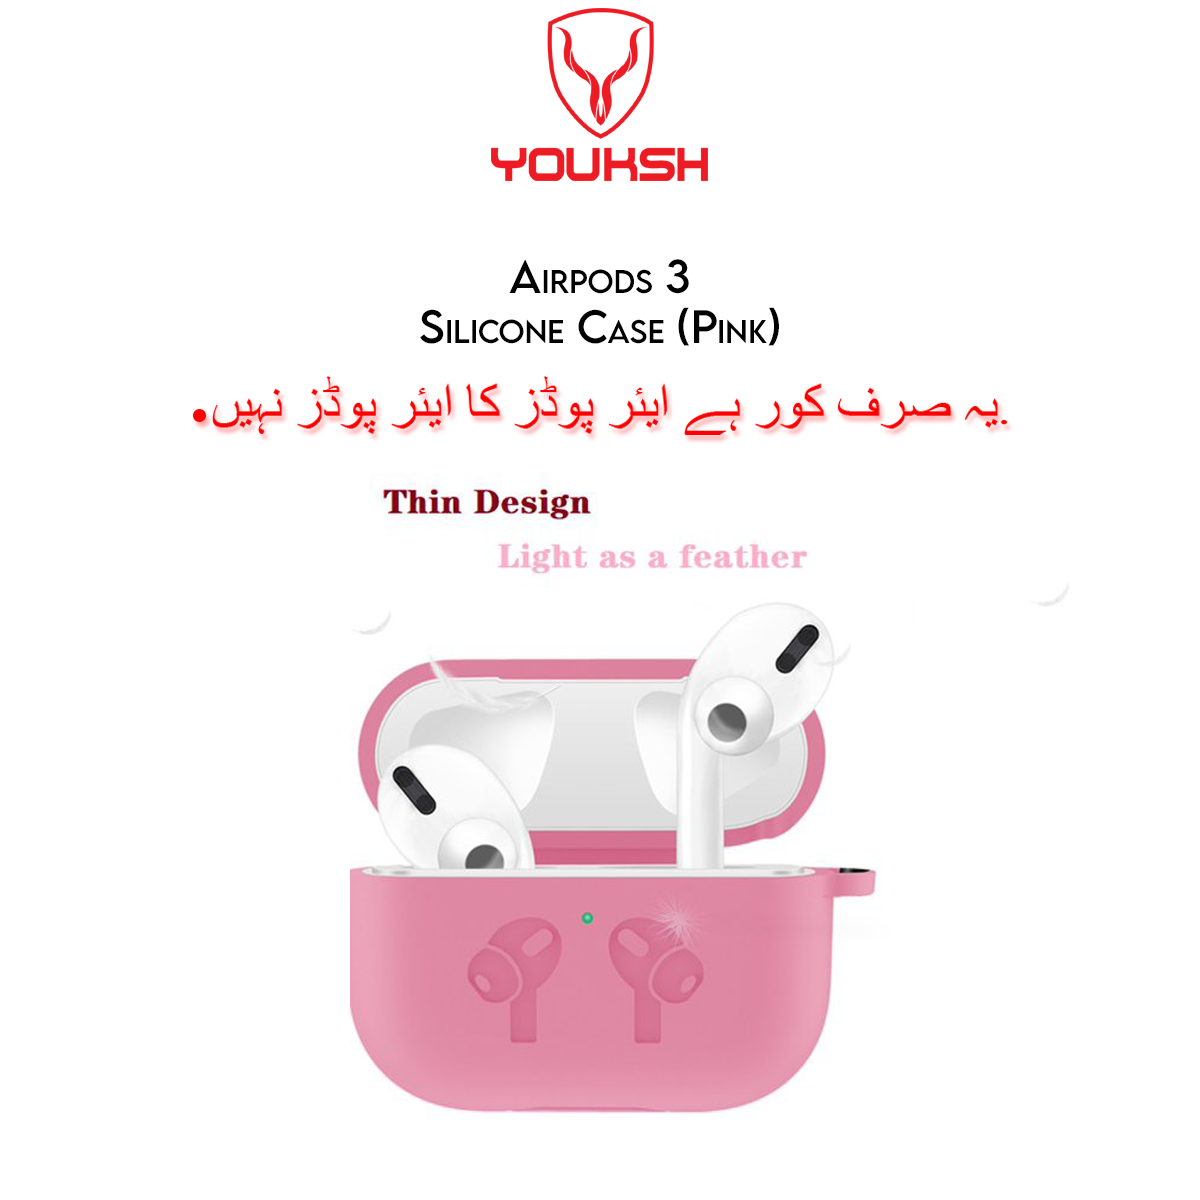 YOUKSH Airpods (Series 3) Silicone Case - Airpods (Series 3) Silicone Case - Airpods (Series 3) Silicone Rubber Cover - High Quality Shock Proof Case Only.